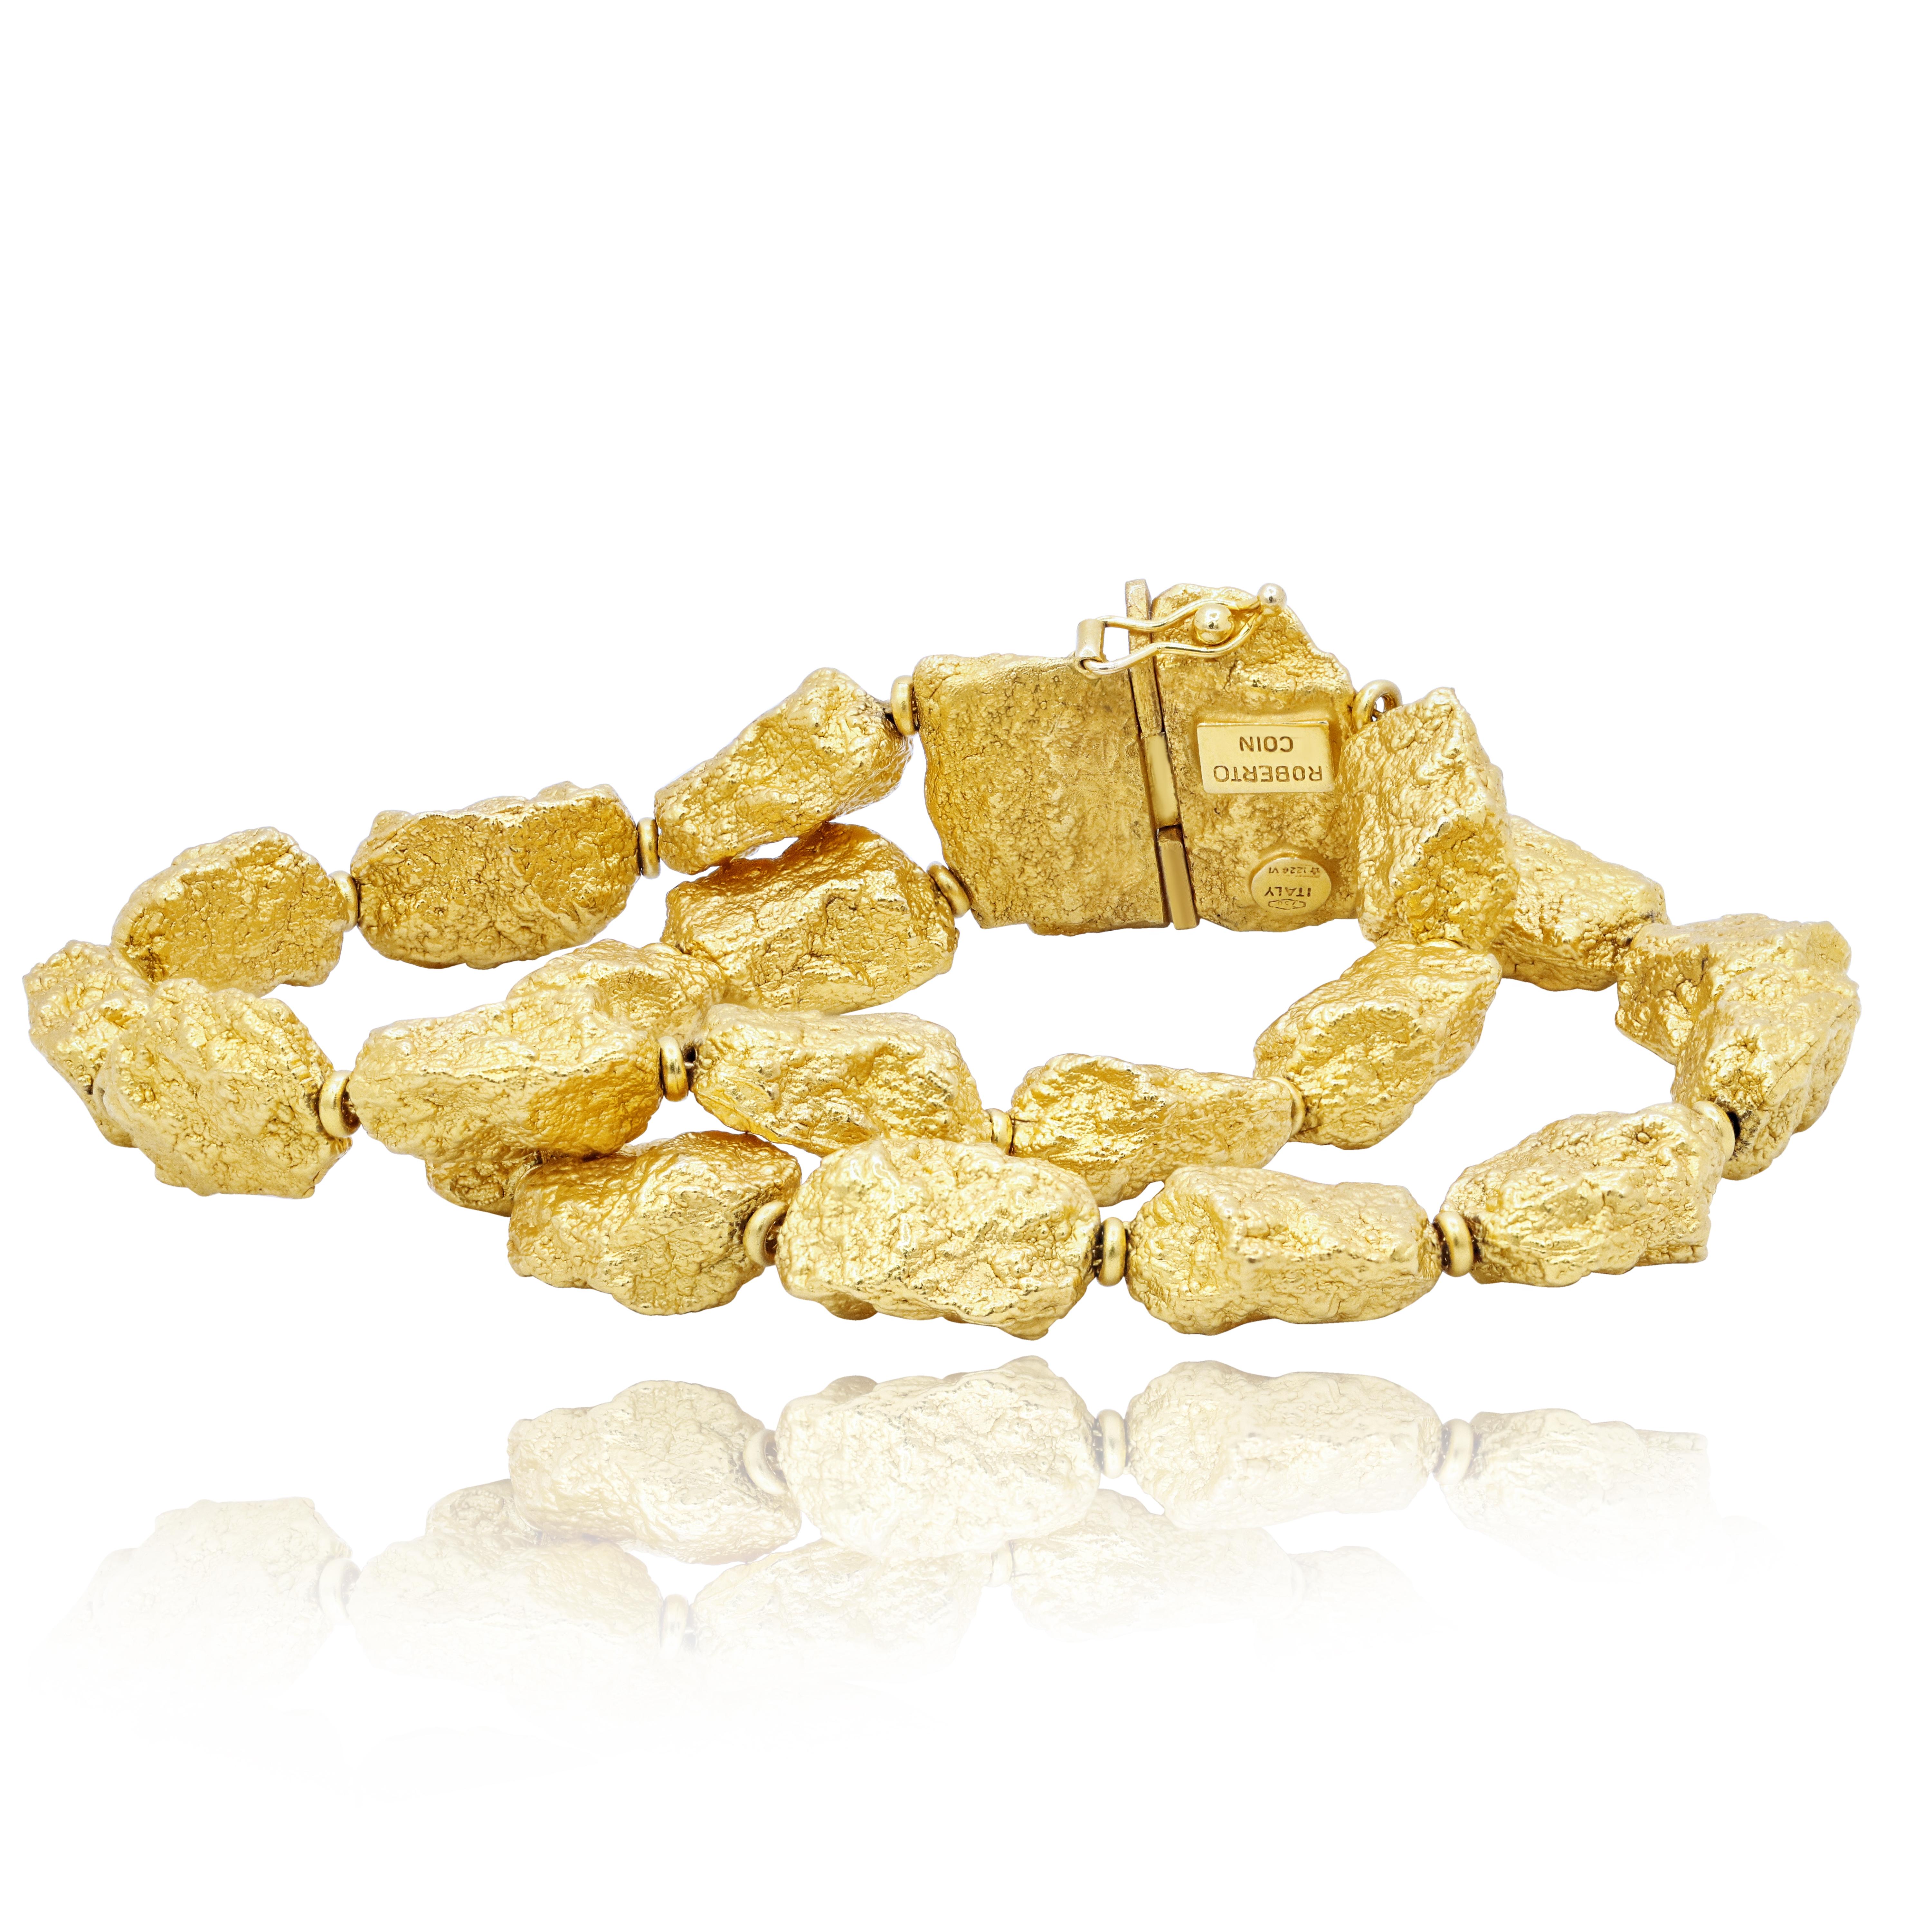 Roberto Coin fancy bracelet comprised of 18ct yellow gold hollow links that are fashioned in the shapes of gold nuggets.

This product will be packaged in a custom box

Composition:
18K yellow gold
Weight: 45.7g

Warranty
Limited lifetime